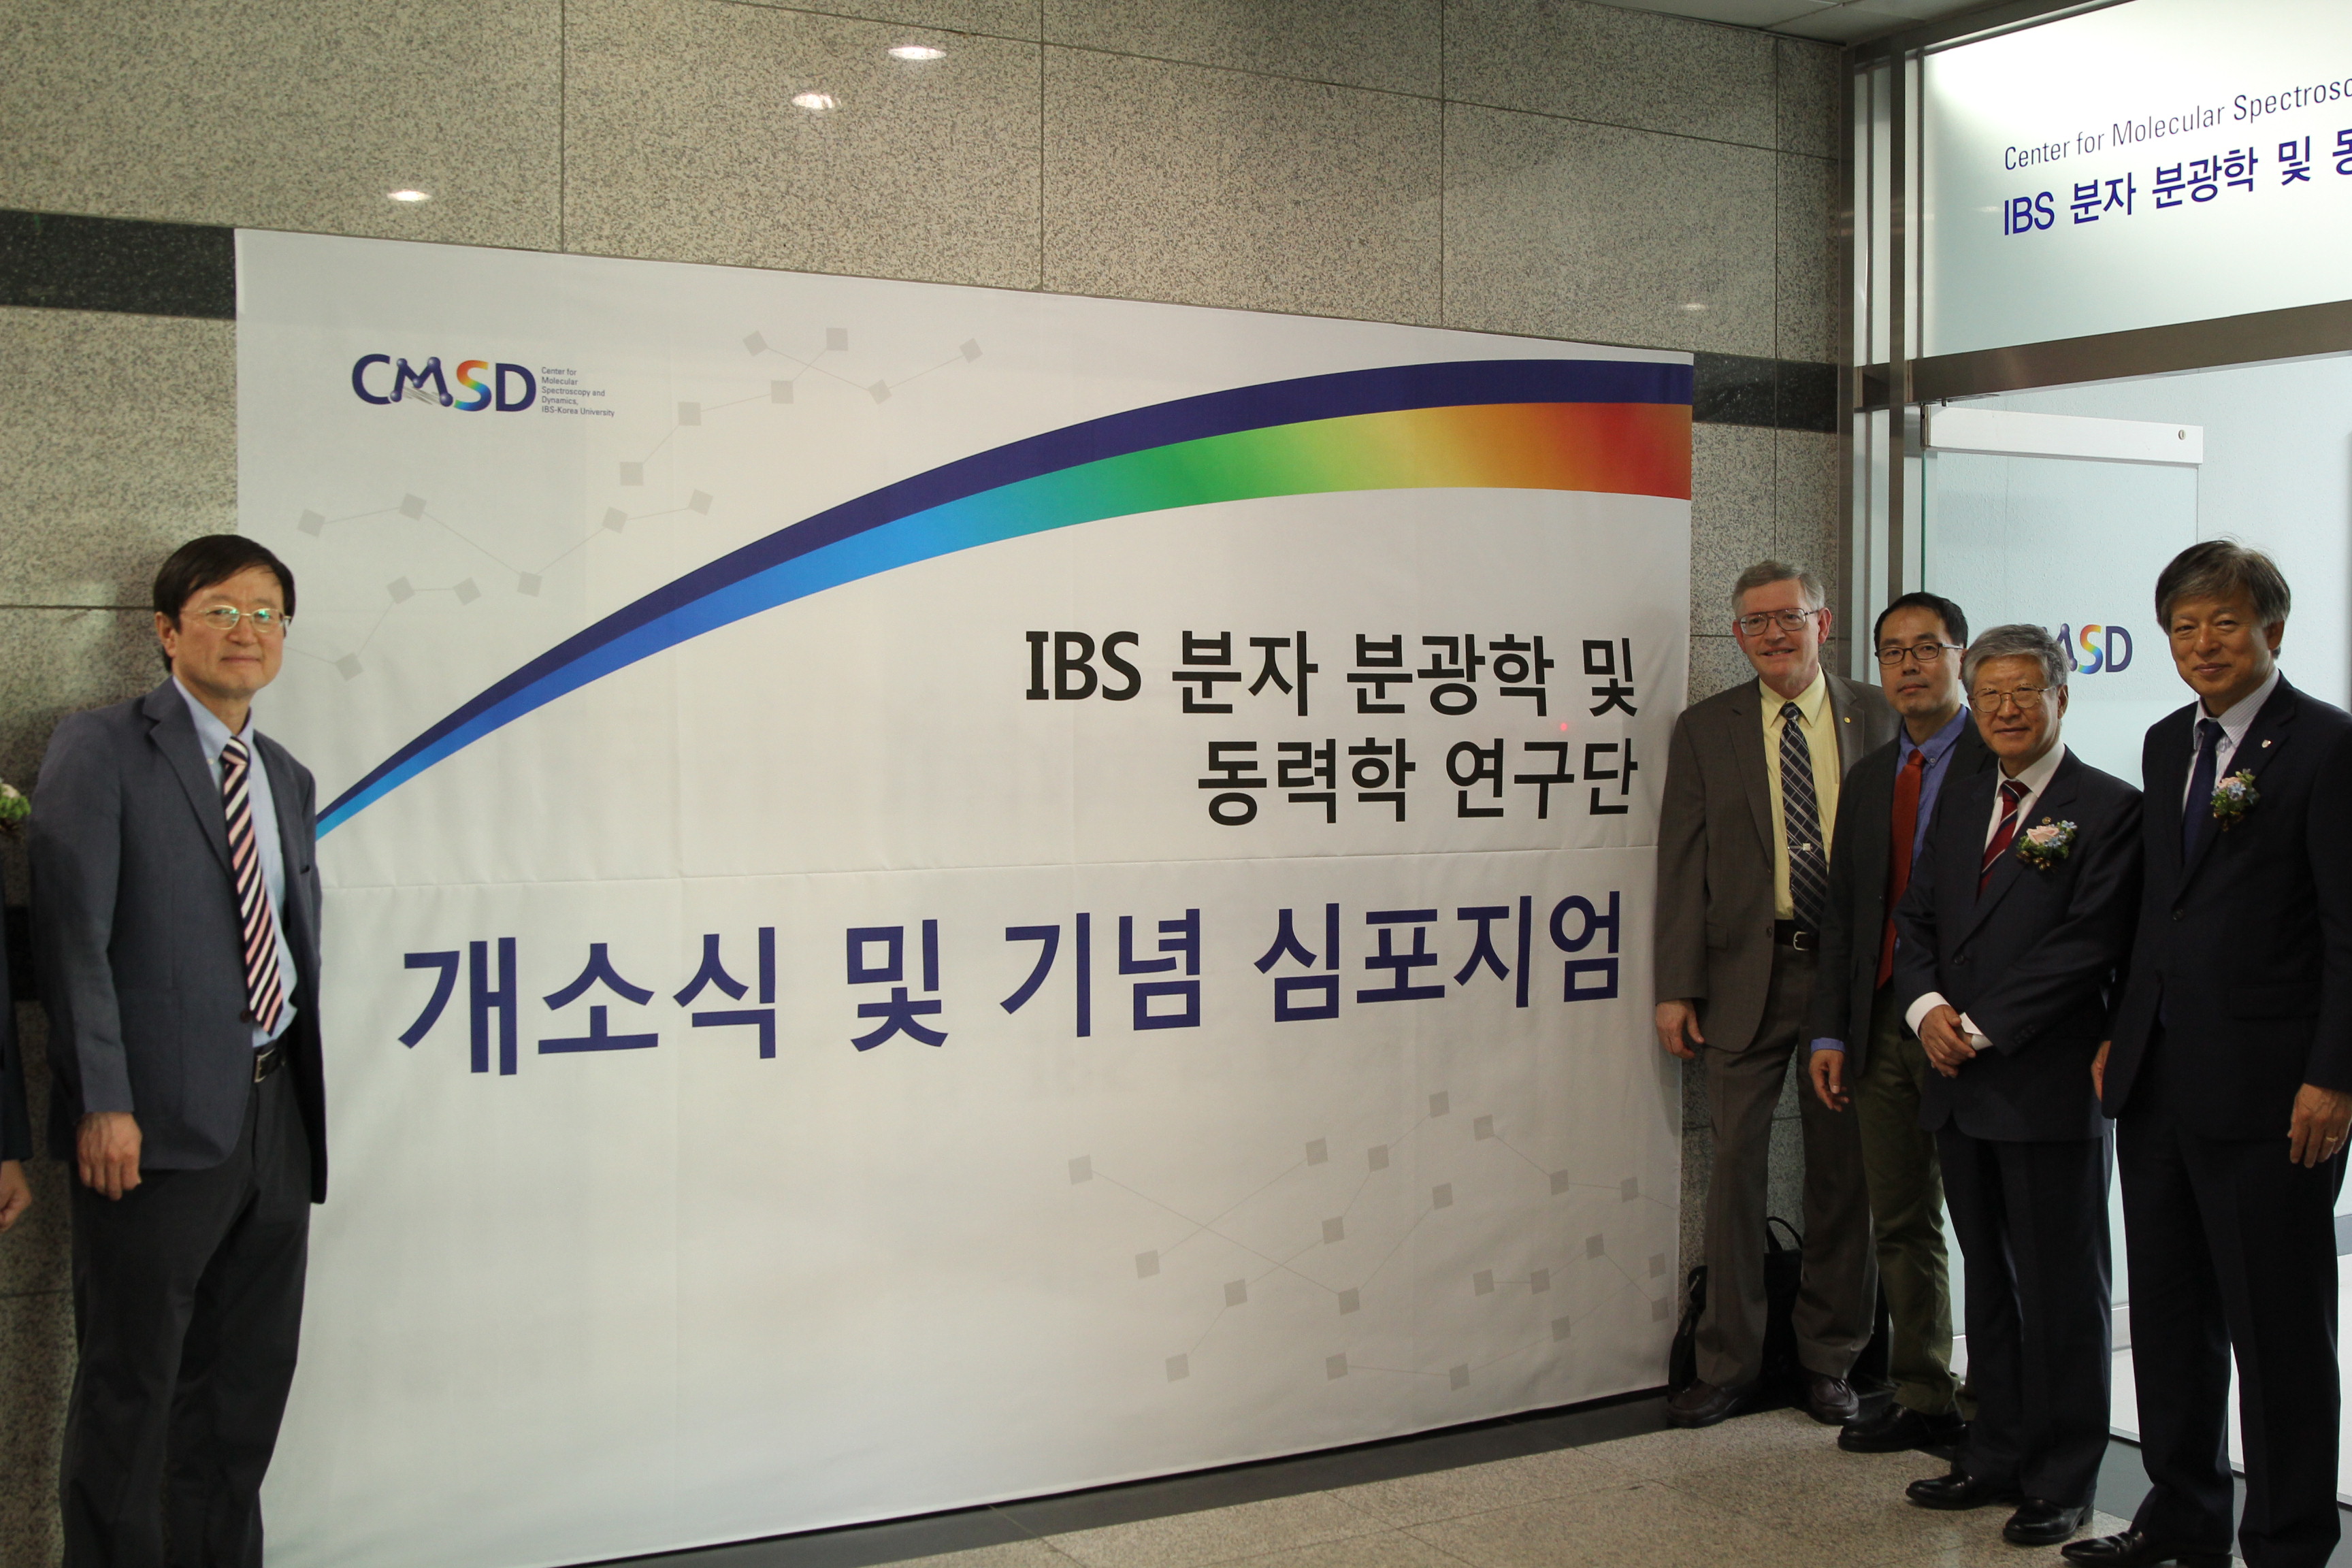 Opening of IBS Center for Molecular Spectroscopy and Dynamics at Korea University 사진